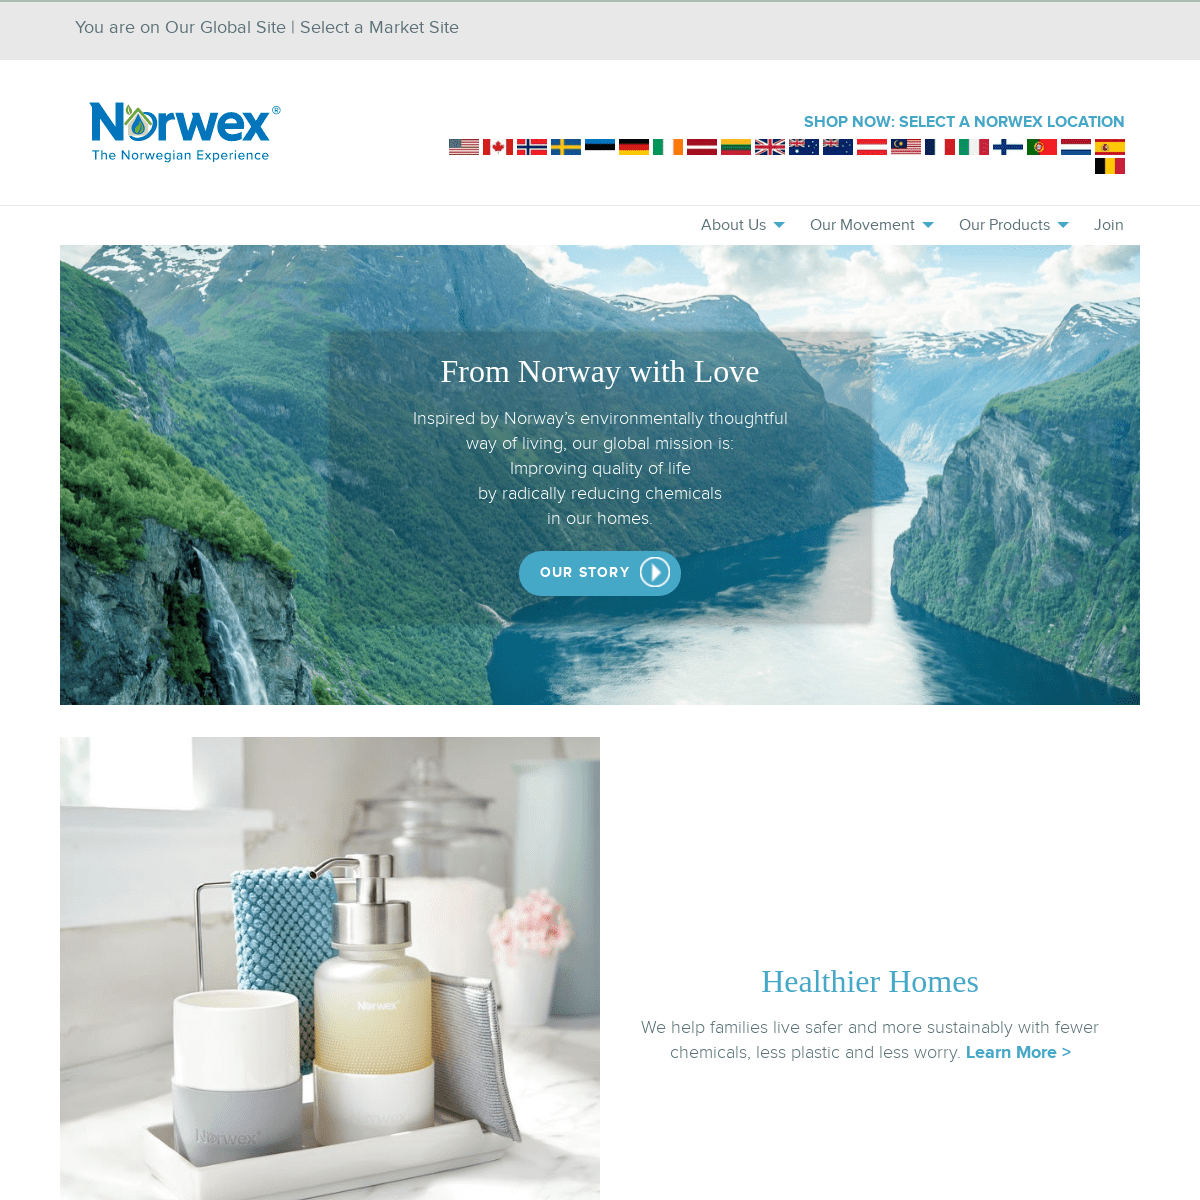 A complete backup of https://norwex.com